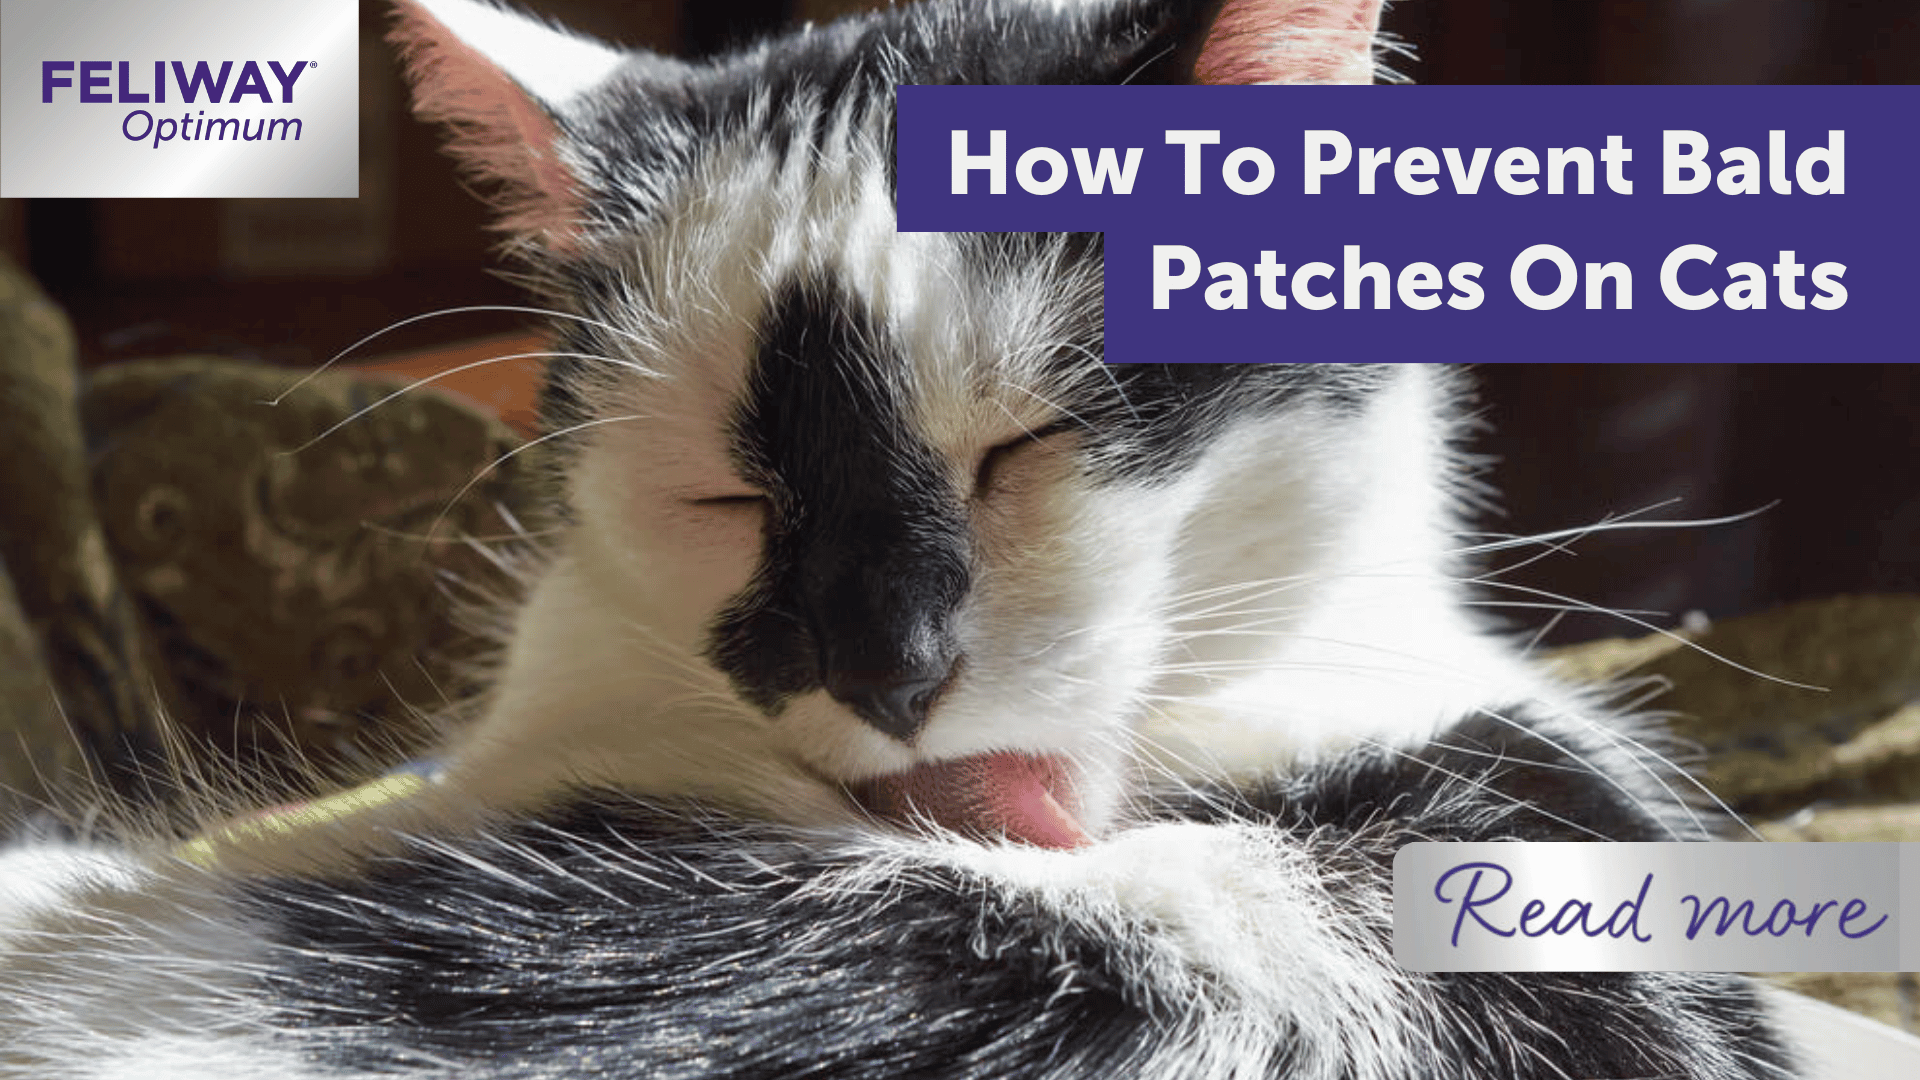 How To Prevent Bald Patches On Cats